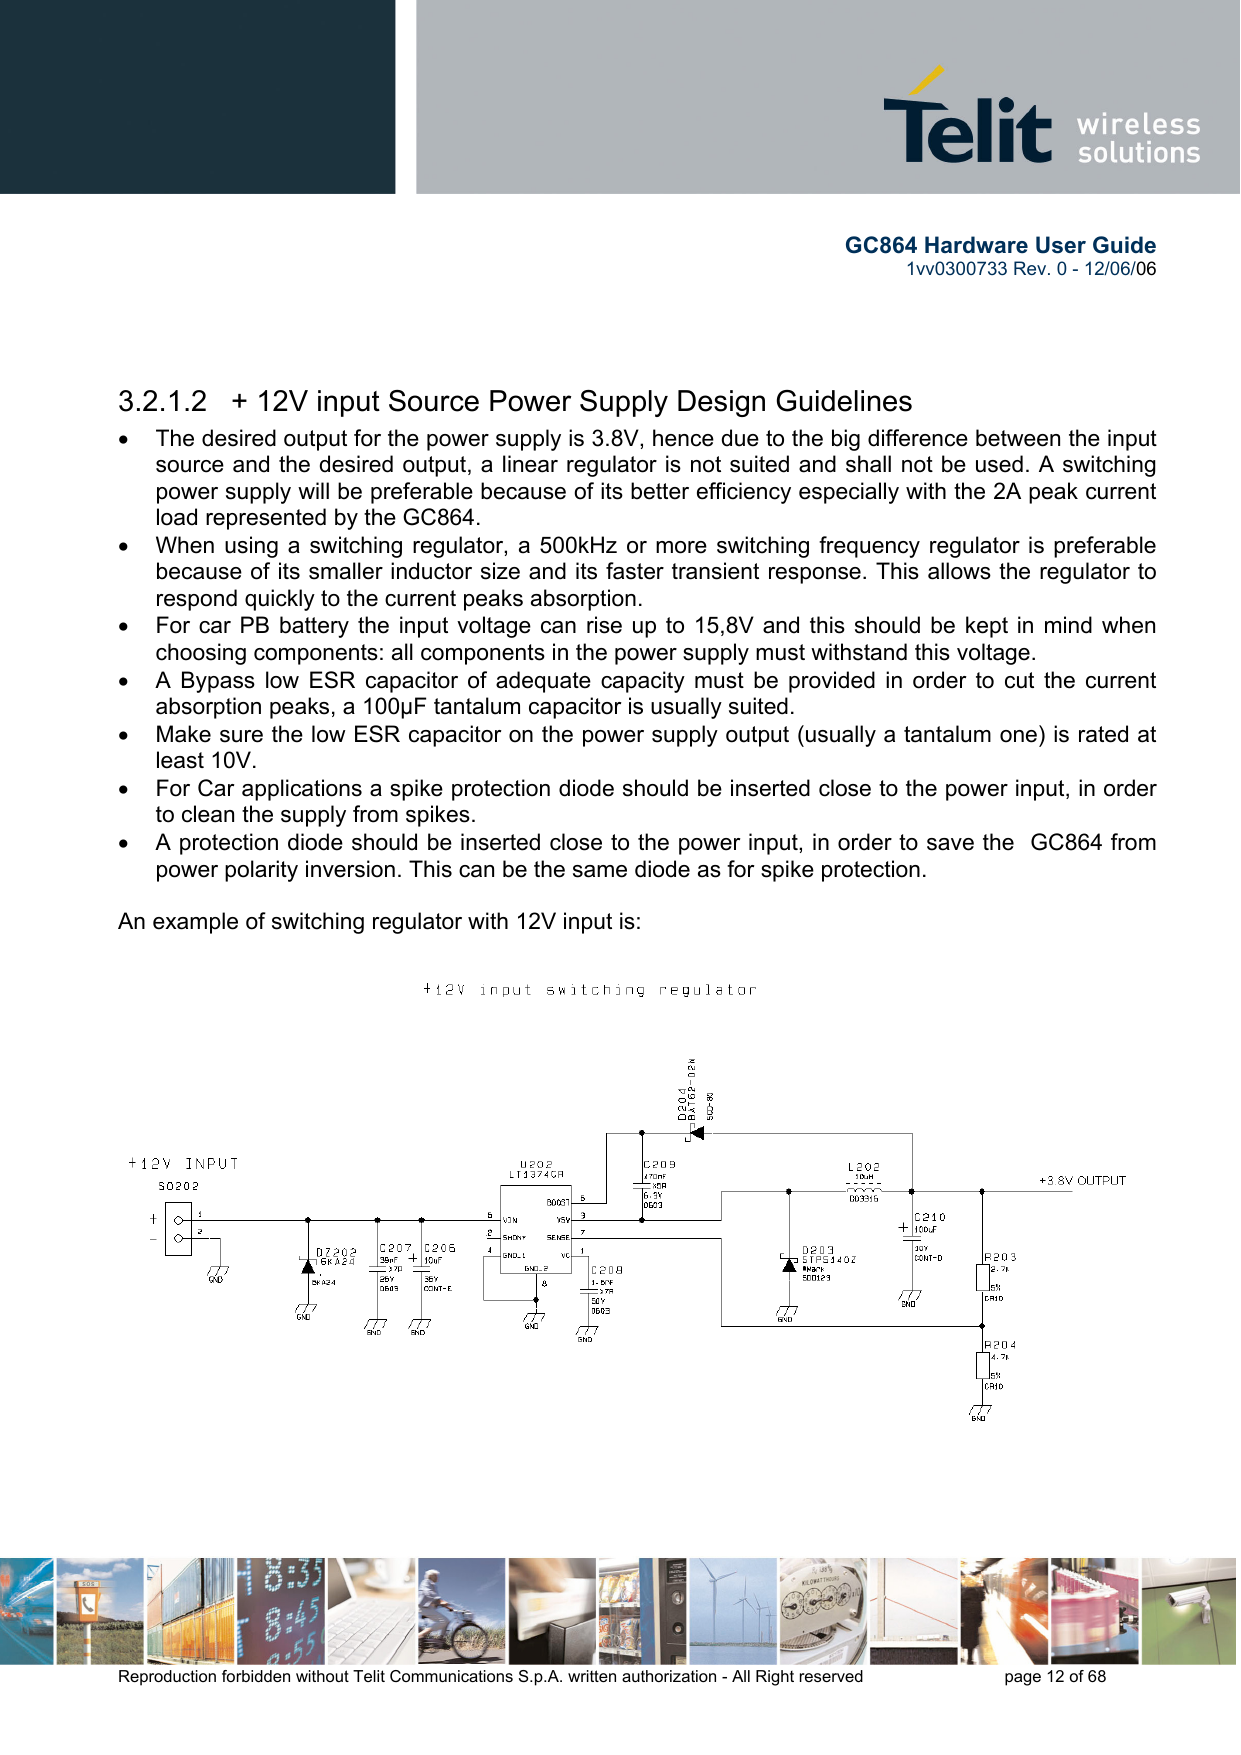        GC864 Hardware User Guide  1vv0300733 Rev. 0 - 12/06/06  Reproduction forbidden without Telit Communications S.p.A. written authorization - All Right reserved    page 12 of 68     3.2.1.2   + 12V input Source Power Supply Design Guidelines •  The desired output for the power supply is 3.8V, hence due to the big difference between the input source and the desired output, a linear regulator is not suited and shall not be used. A switching power supply will be preferable because of its better efficiency especially with the 2A peak current load represented by the GC864. •  When using a switching regulator, a 500kHz or more switching frequency regulator is preferable because of its smaller inductor size and its faster transient response. This allows the regulator to respond quickly to the current peaks absorption.  •  For car PB battery the input voltage can rise up to 15,8V and this should be kept in mind when choosing components: all components in the power supply must withstand this voltage. •  A Bypass low ESR capacitor of adequate capacity must be provided in order to cut the current absorption peaks, a 100μF tantalum capacitor is usually suited. •  Make sure the low ESR capacitor on the power supply output (usually a tantalum one) is rated at least 10V. •  For Car applications a spike protection diode should be inserted close to the power input, in order to clean the supply from spikes.  •  A protection diode should be inserted close to the power input, in order to save the  GC864 from power polarity inversion. This can be the same diode as for spike protection.  An example of switching regulator with 12V input is:  